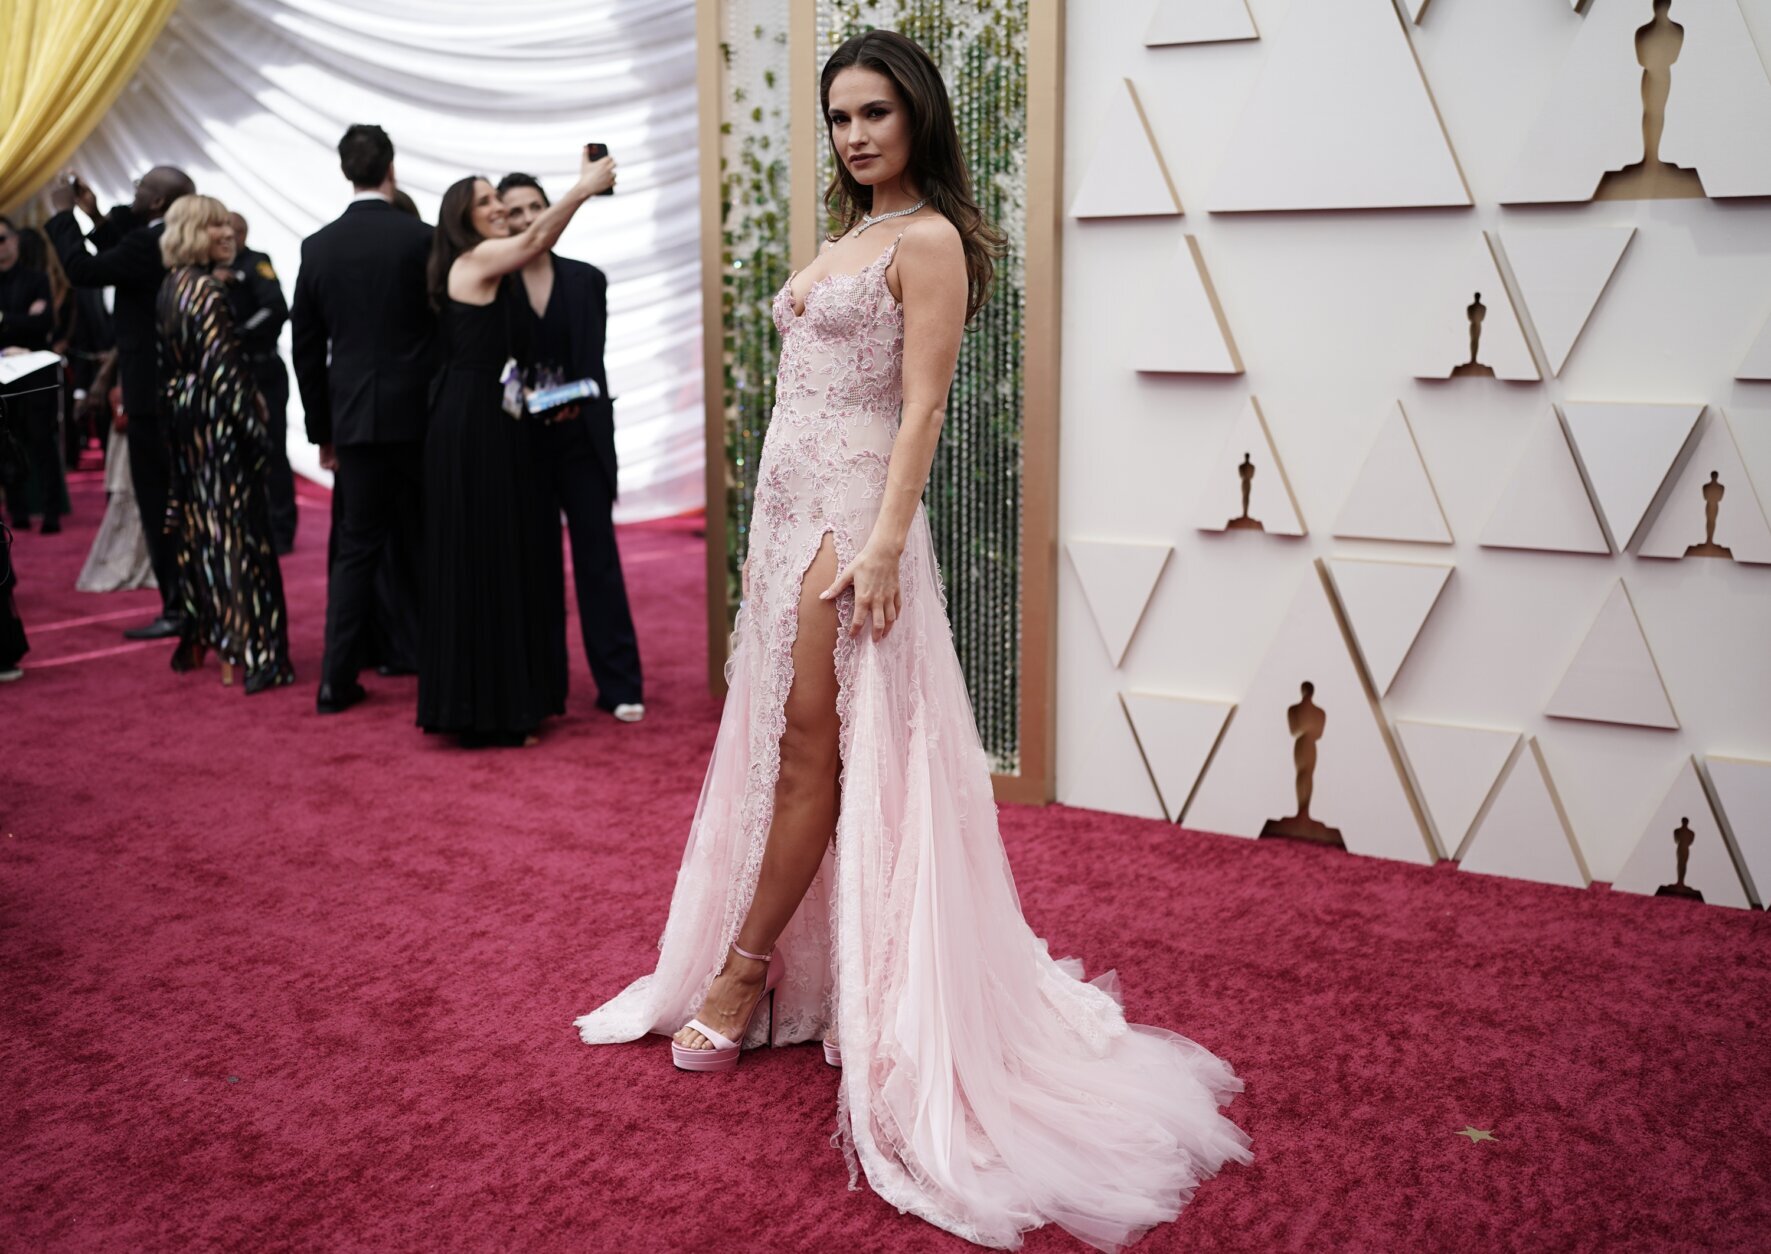 Lily James arrives at the Oscars on Sunday, March 27, 2022, at the Dolby Theatre in Los Angeles. (AP Photo/Jae C. Hong)